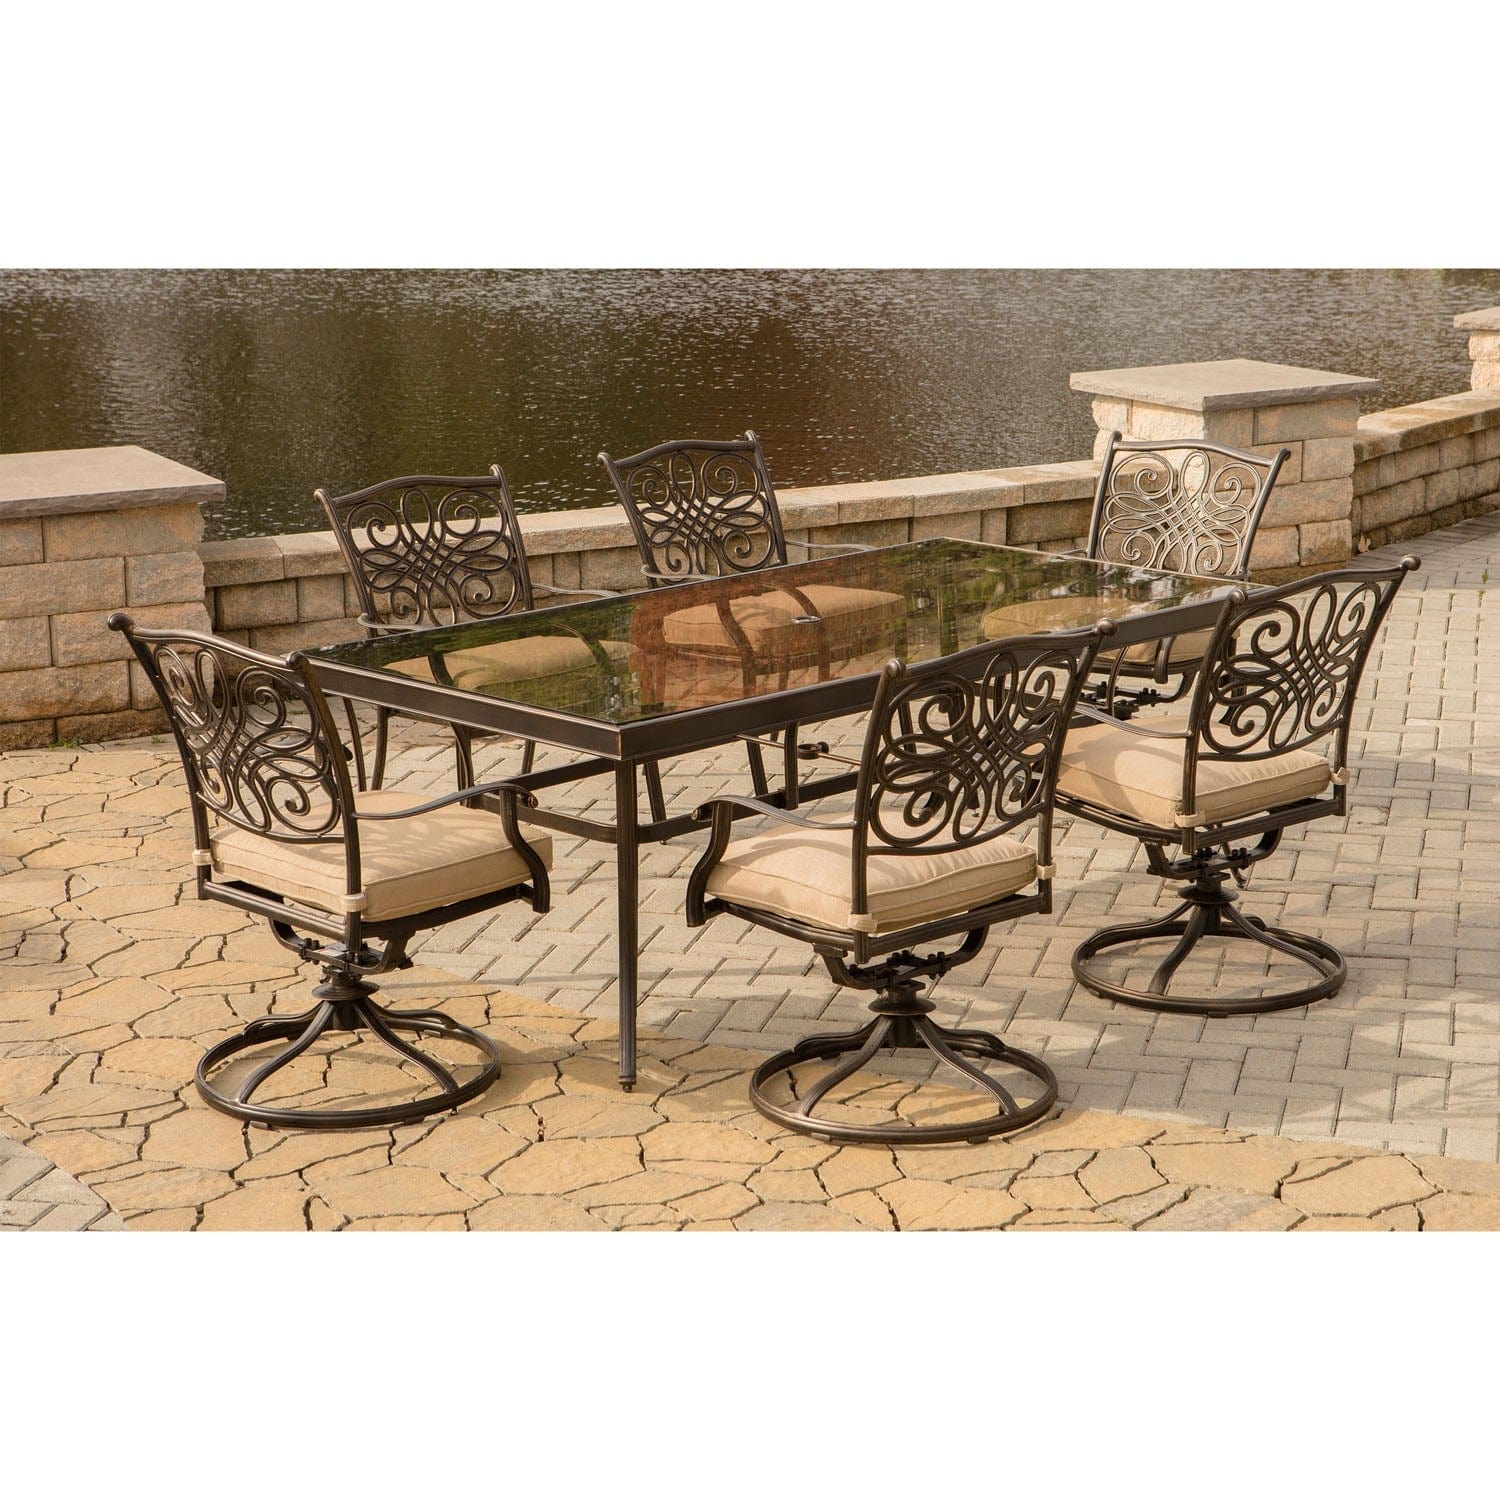 Hanover Outdoor Dining Set Hanover - Traditions 7-Piece Dining Set in Tan with Extra Large Glass-Top Dining Table - TRADDN7PCSWG